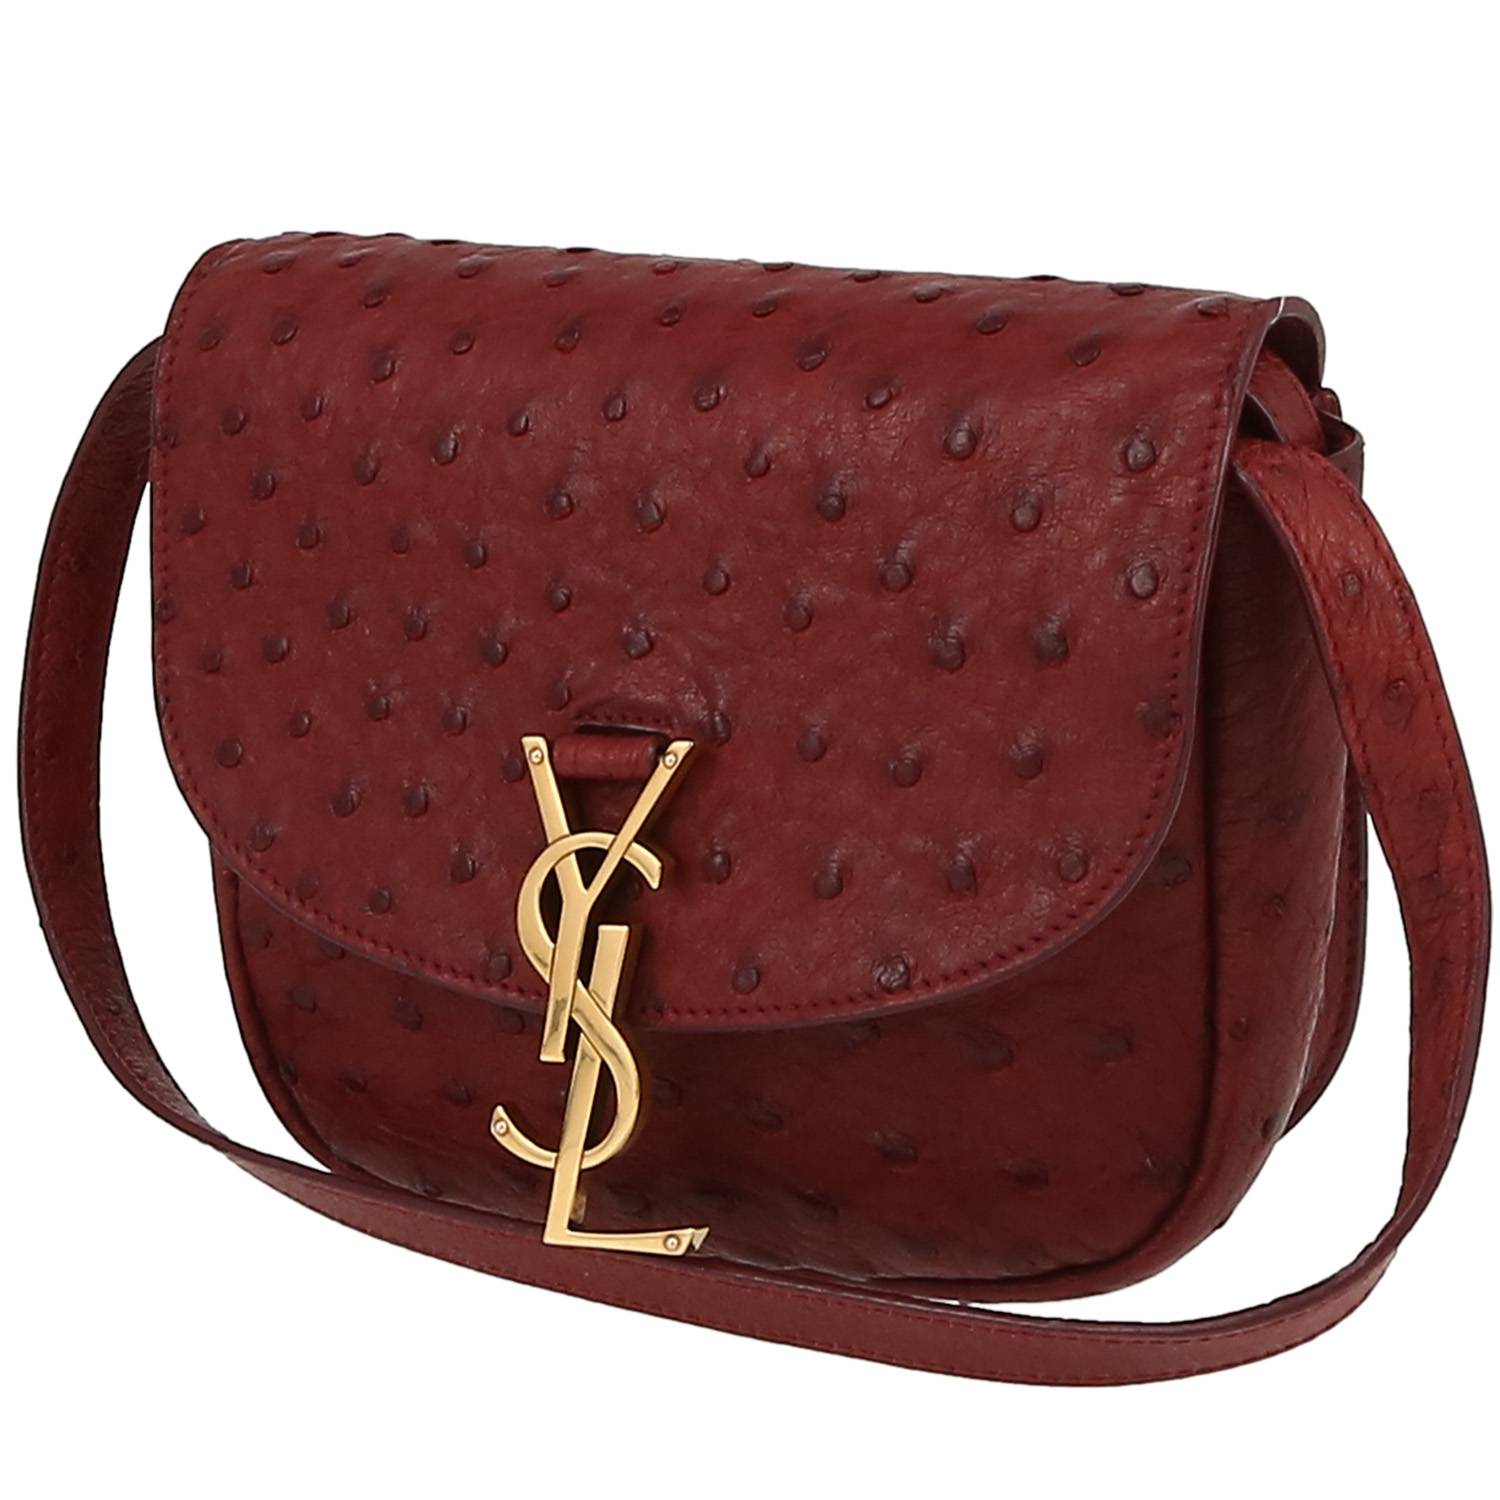 Kaia Small Model Shoulder Bag In Ostrich